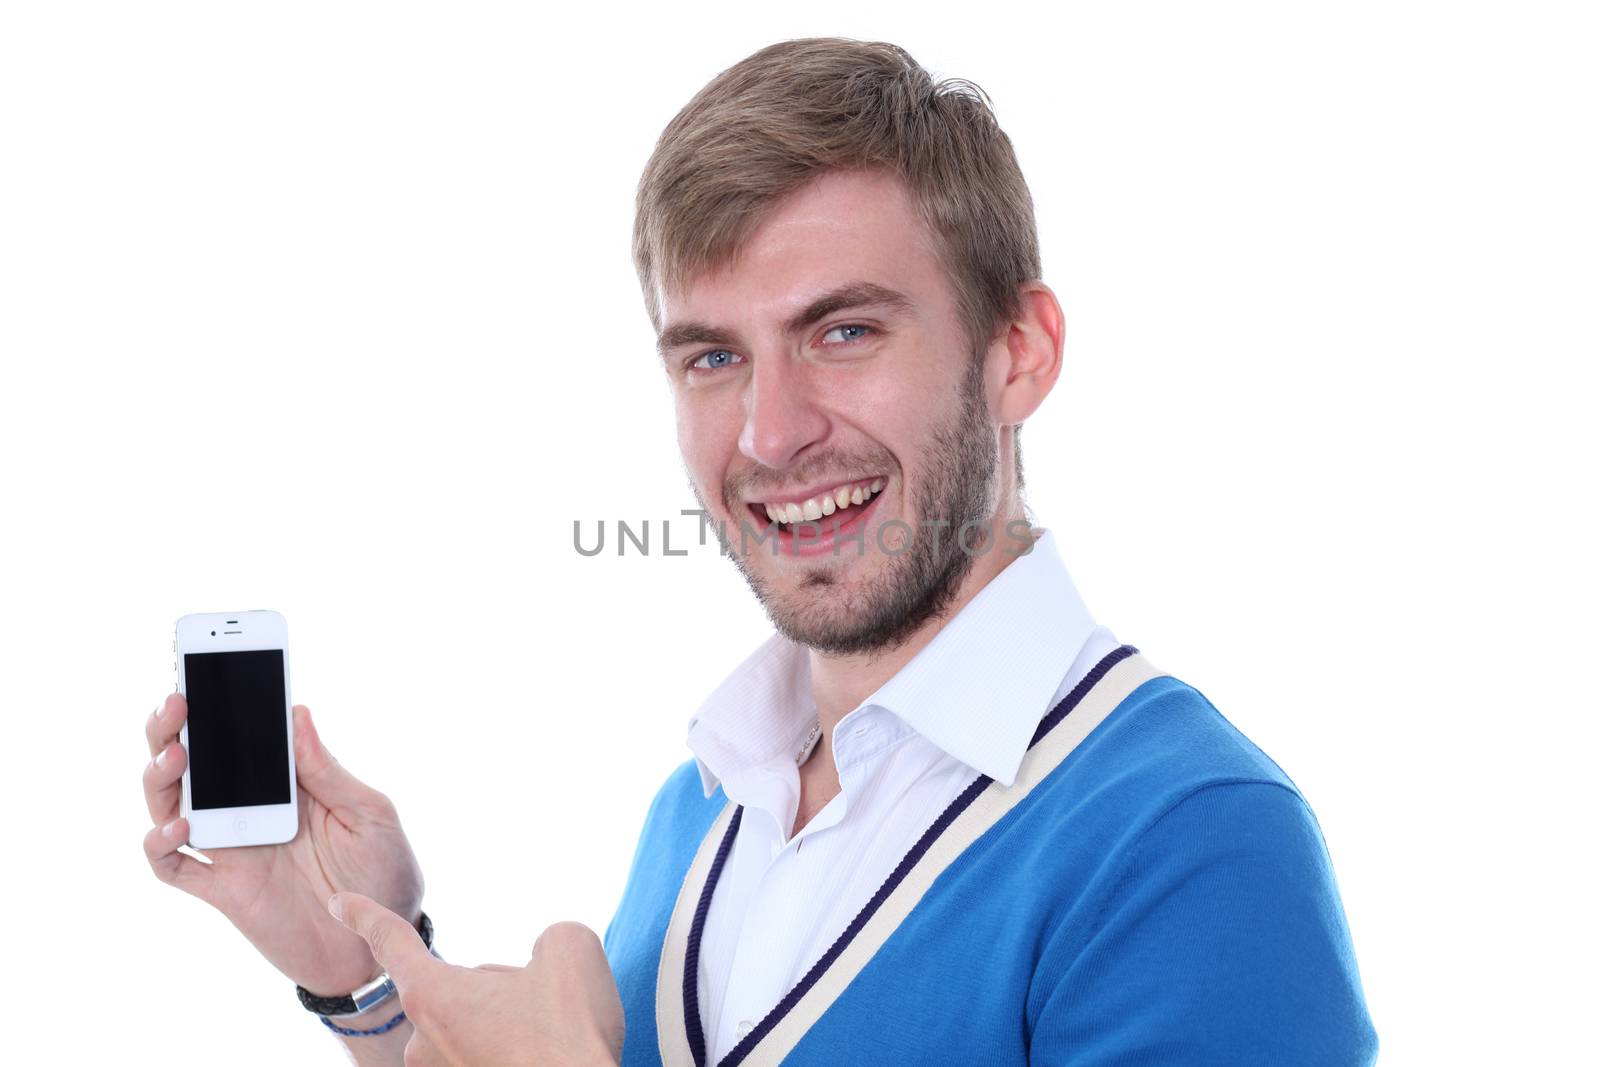 young man on his mobile phone